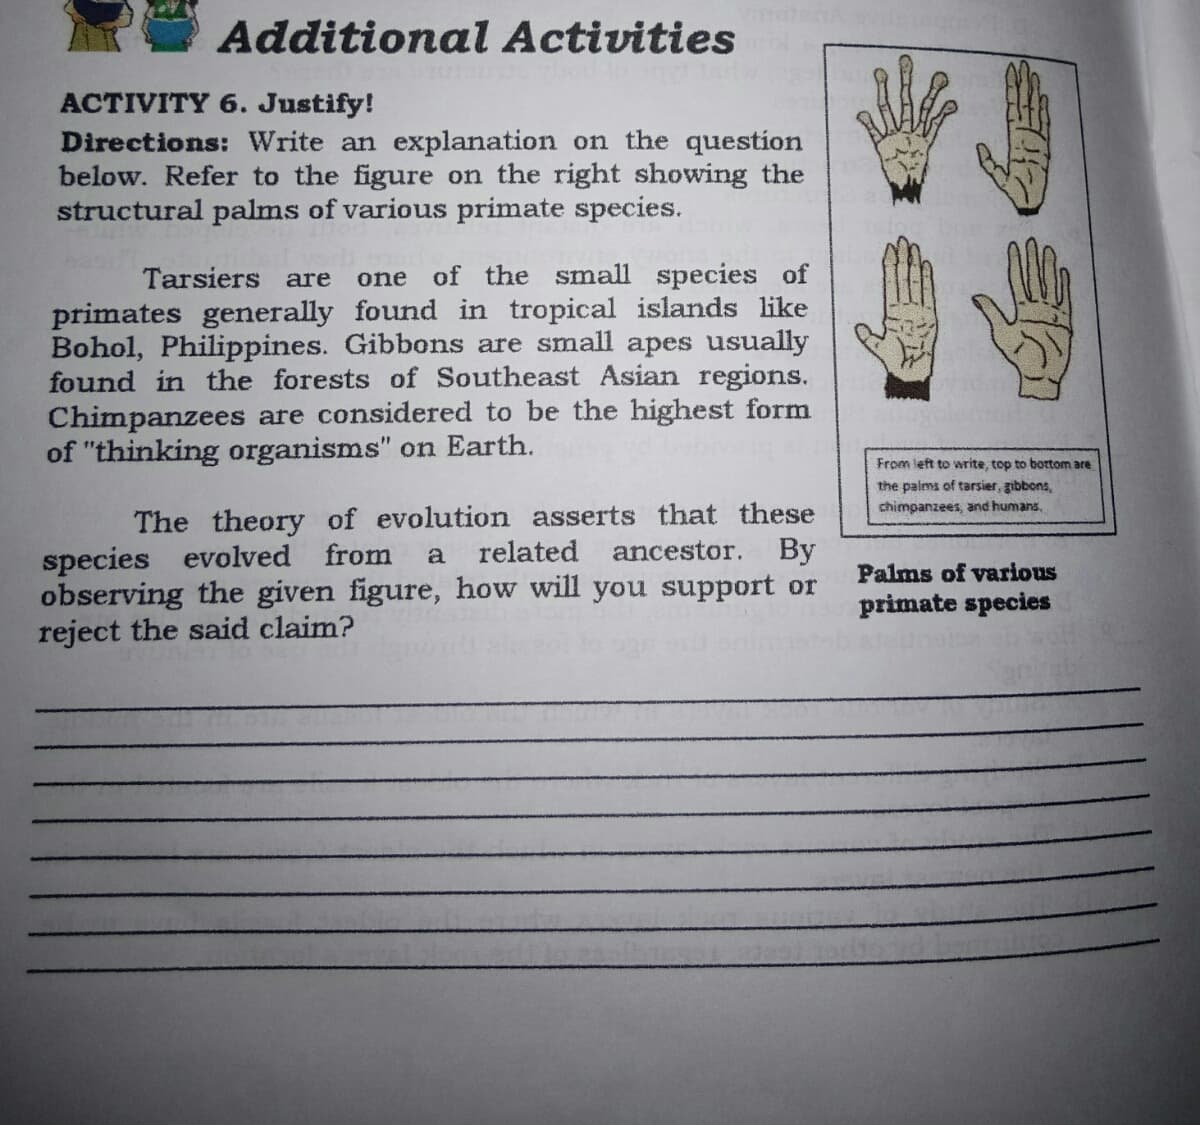 Additional Activities
ACTIVITY 6. Justify!
Directions: Write an explanation on the question
below. Refer to the figure on the right showing the
structural palms of various primate species.
Tarsiers are
of the small species of
one
primates generally found in tropical islands like
Bohol, Philippines. Gibbons are small apes usually
found in the forests of Southeast Asian regions.
Chimpanzees are considered to be the highest form
of "thinking organisms" on Earth.
From left to write, top to bortom are
the paims of tarsier, gibbons,
chimpanzees, and humans,
The theory of evolution asserts that these
species evolved
from
a
related
ancestor.
By
Palms of various
observing the given figure, how will you support or
primate species
reject the said claim?
